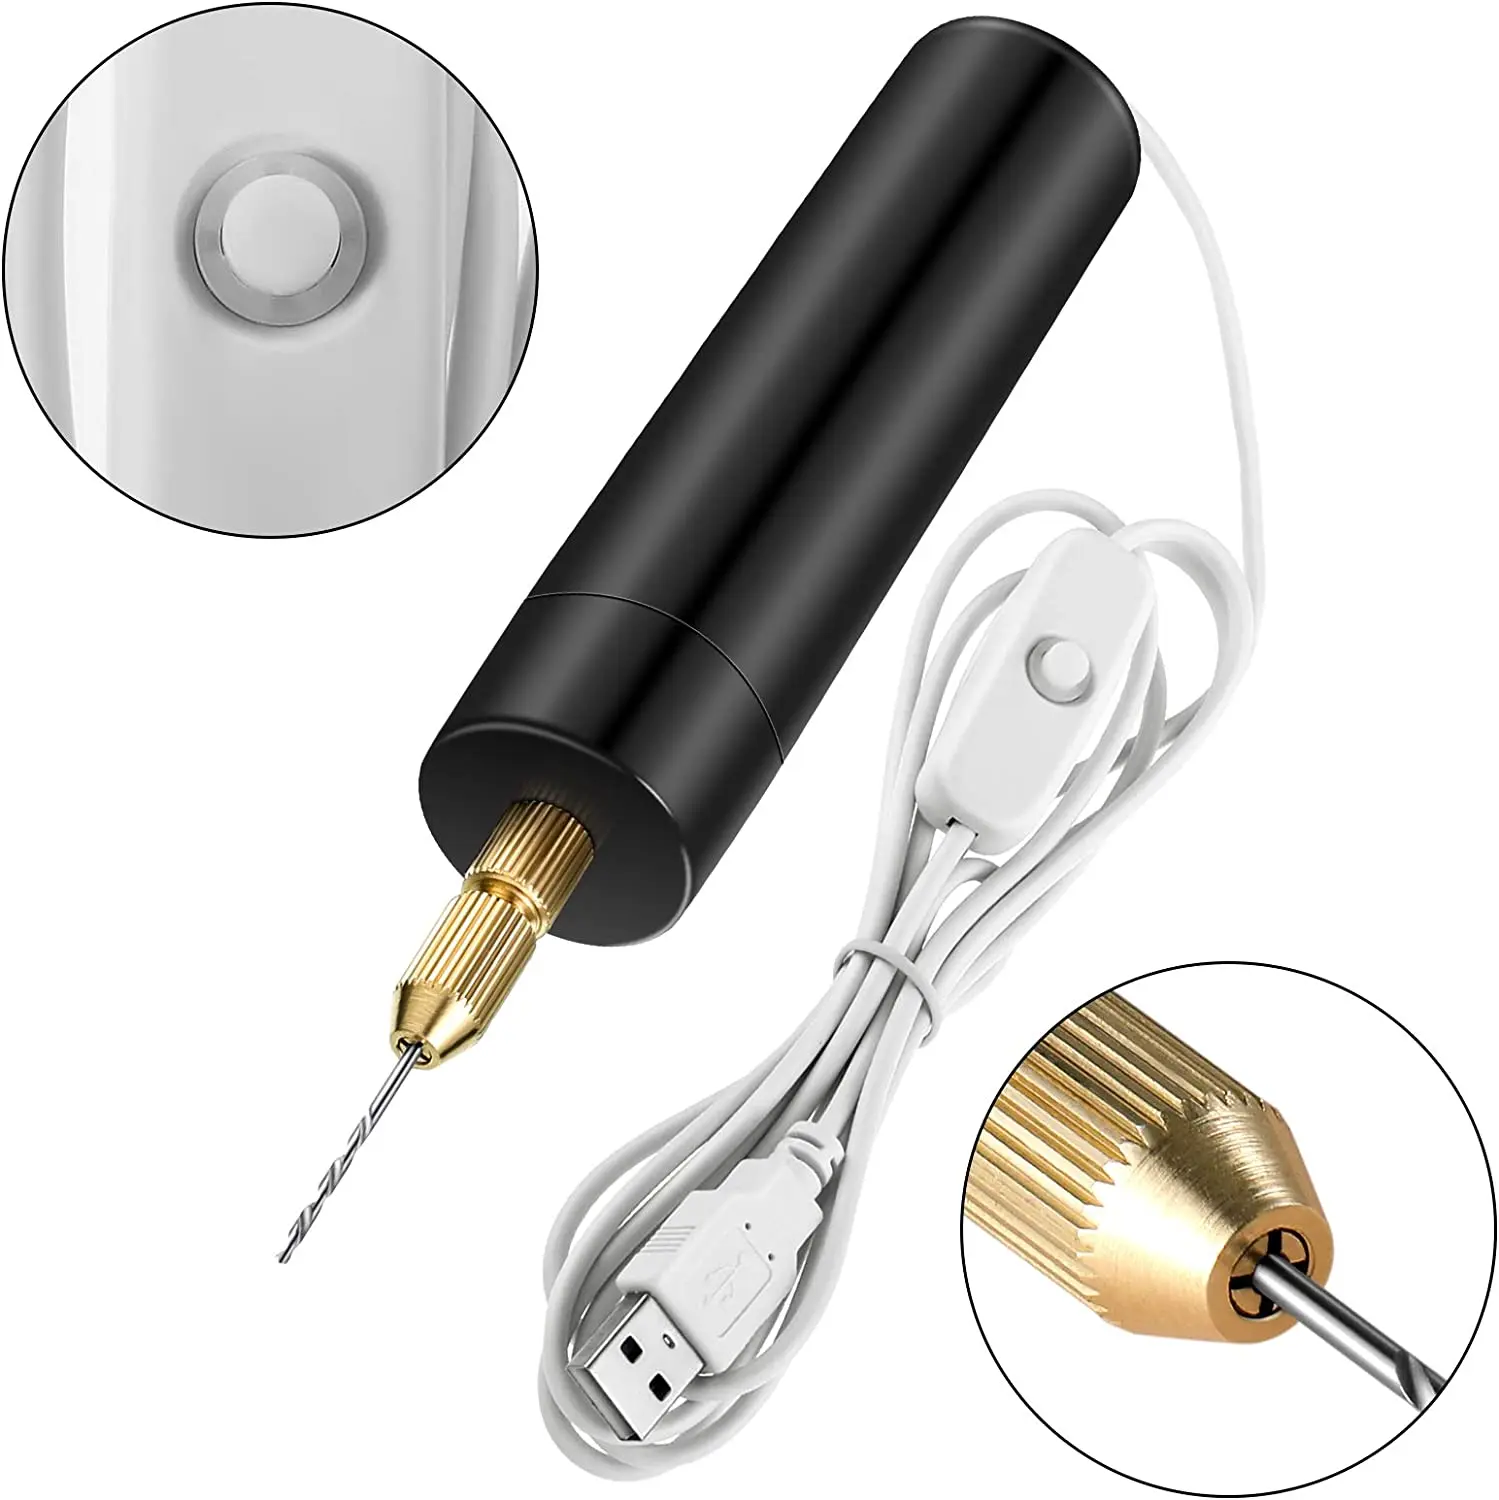 Electric USB Mini Drill 5 Pieces Set USB Drill Rotary Tools Engraver Pen Drilling Jewelry Tools With Drill Bits Power Tools